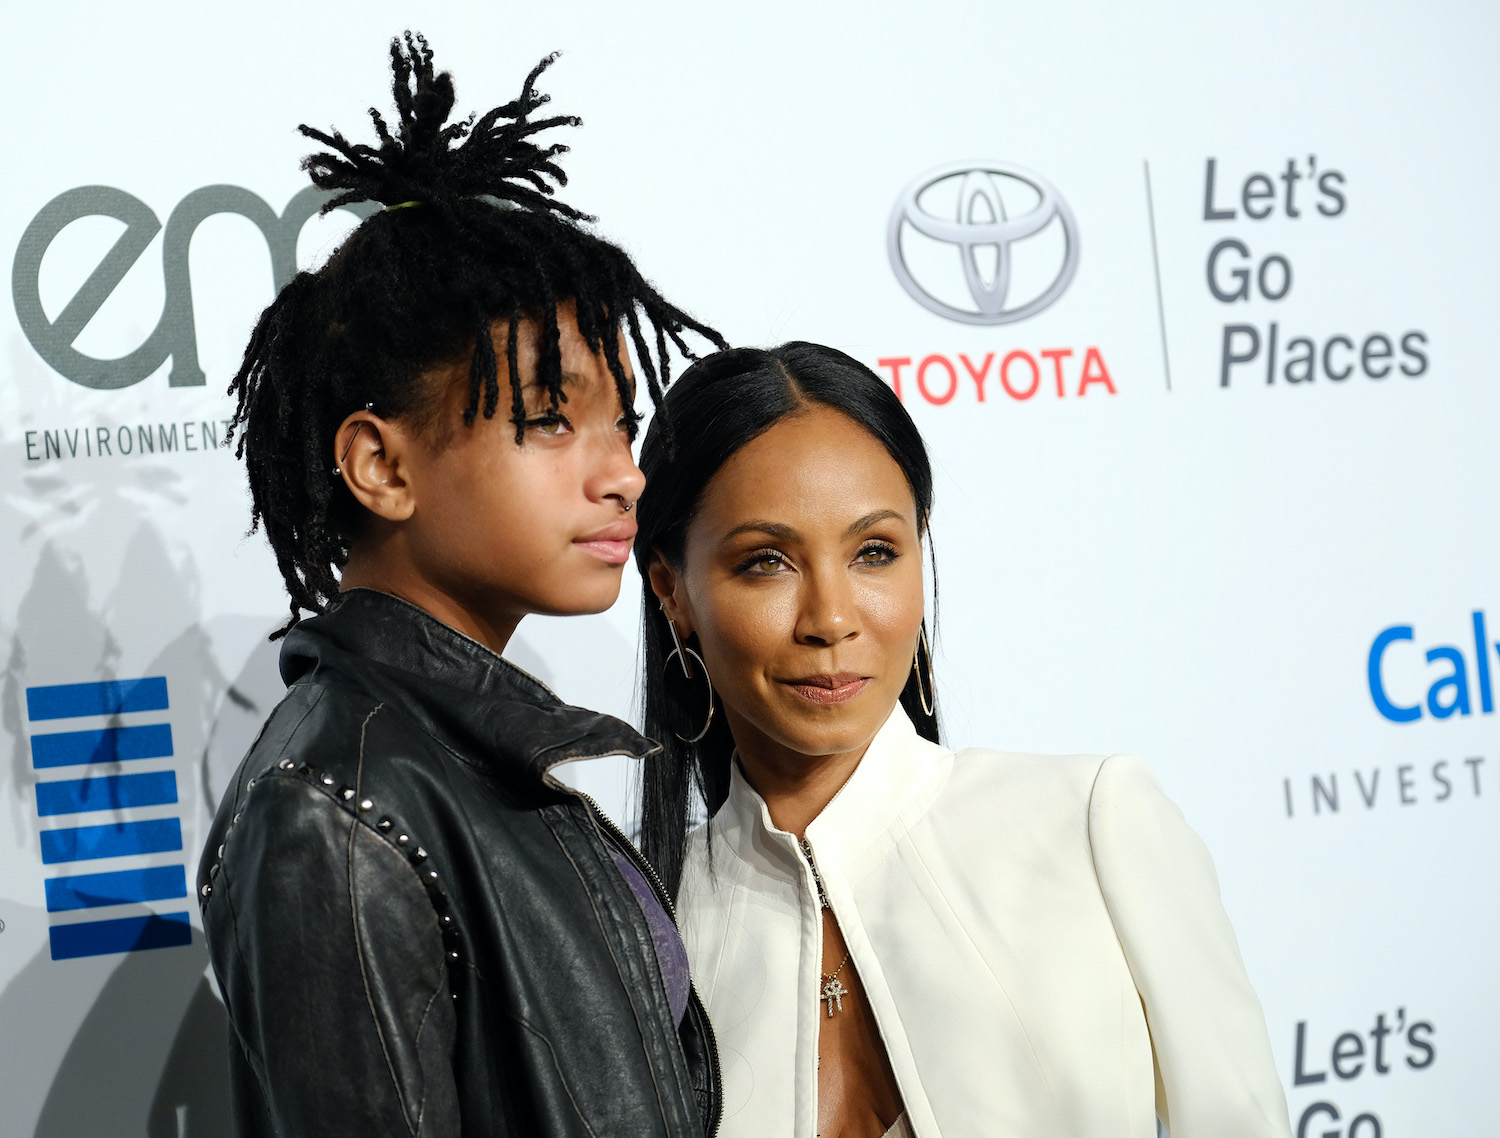 Jada Pinkett-Smith and Willow Smith attend the 26th annual EMA awards